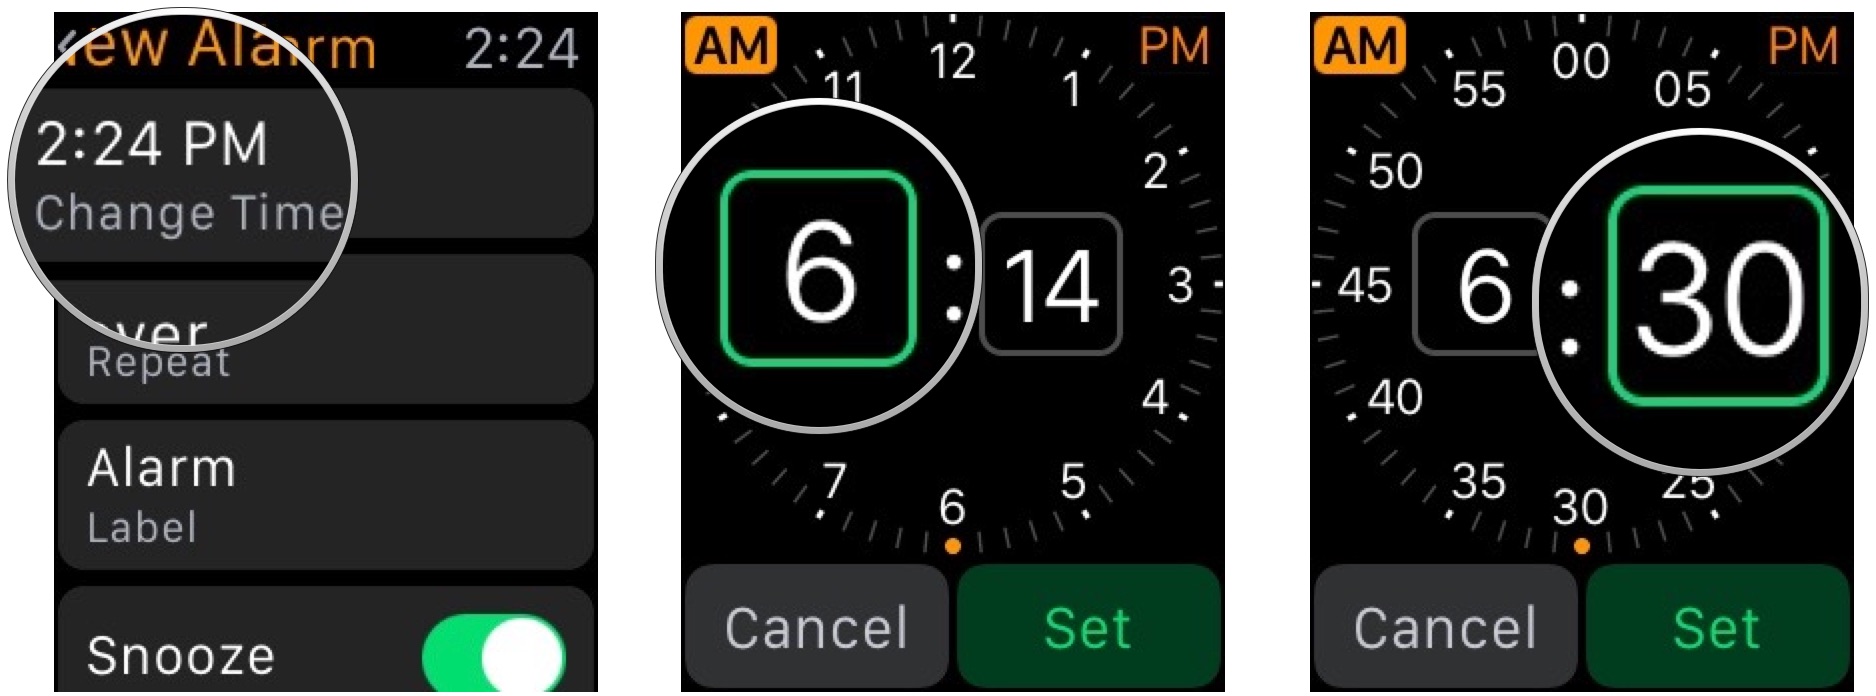 Setting the time for an alarm